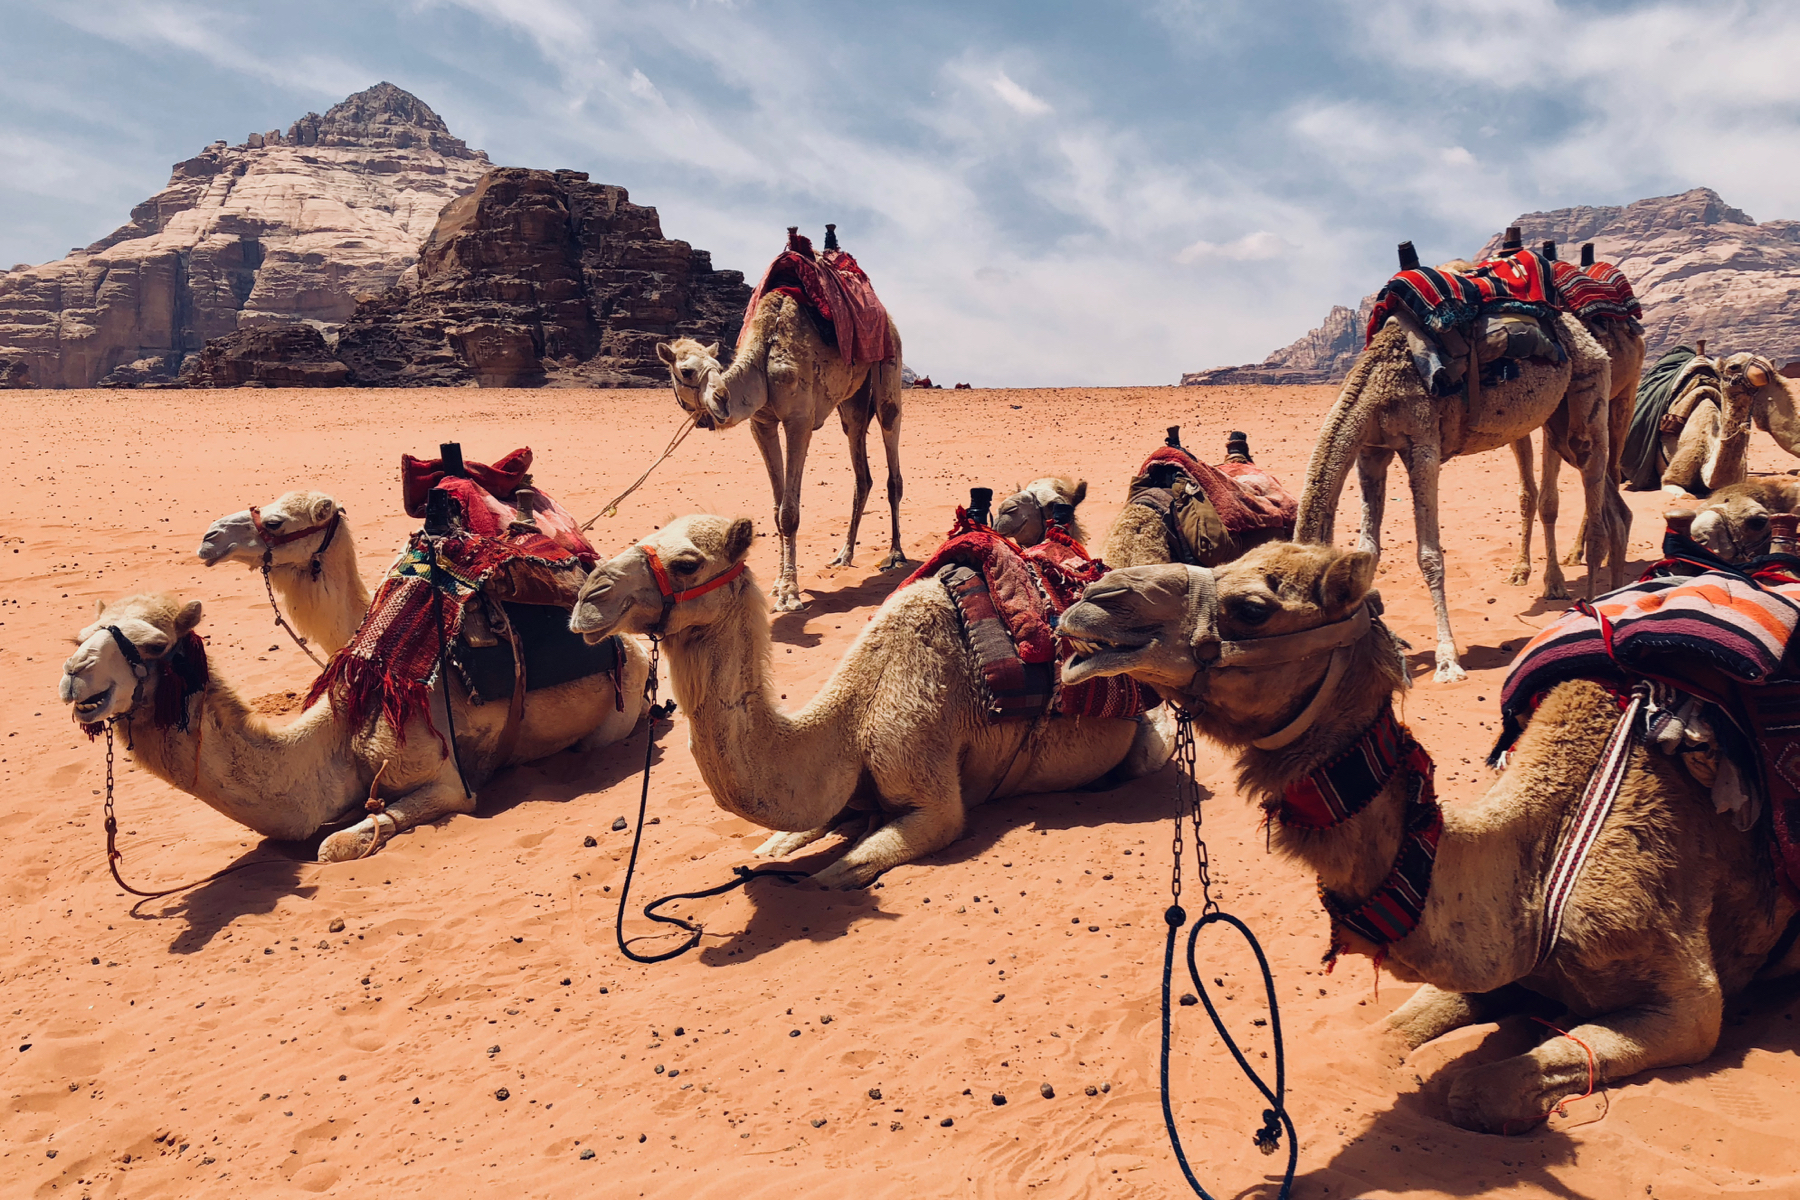 Camels laying on the red sand of Wadi Rum in Jordan